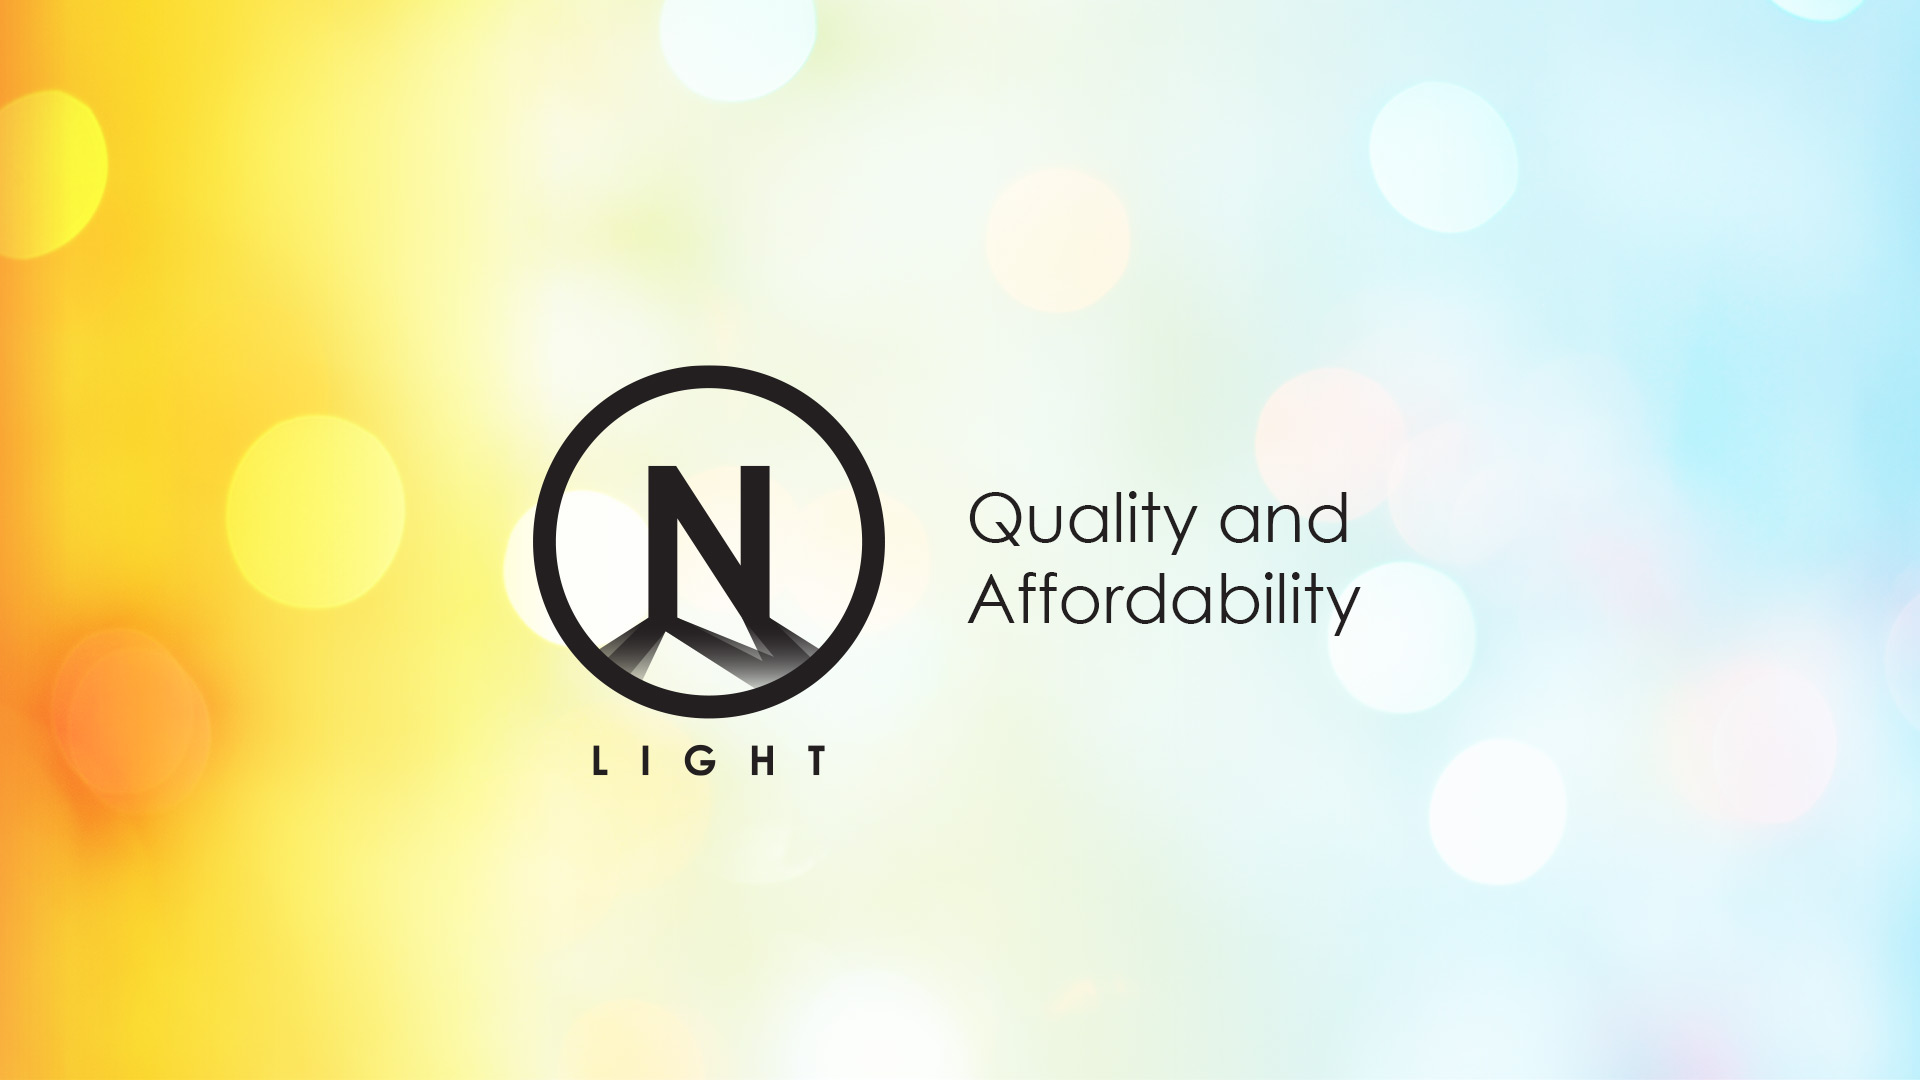 Quality and affordability for all.